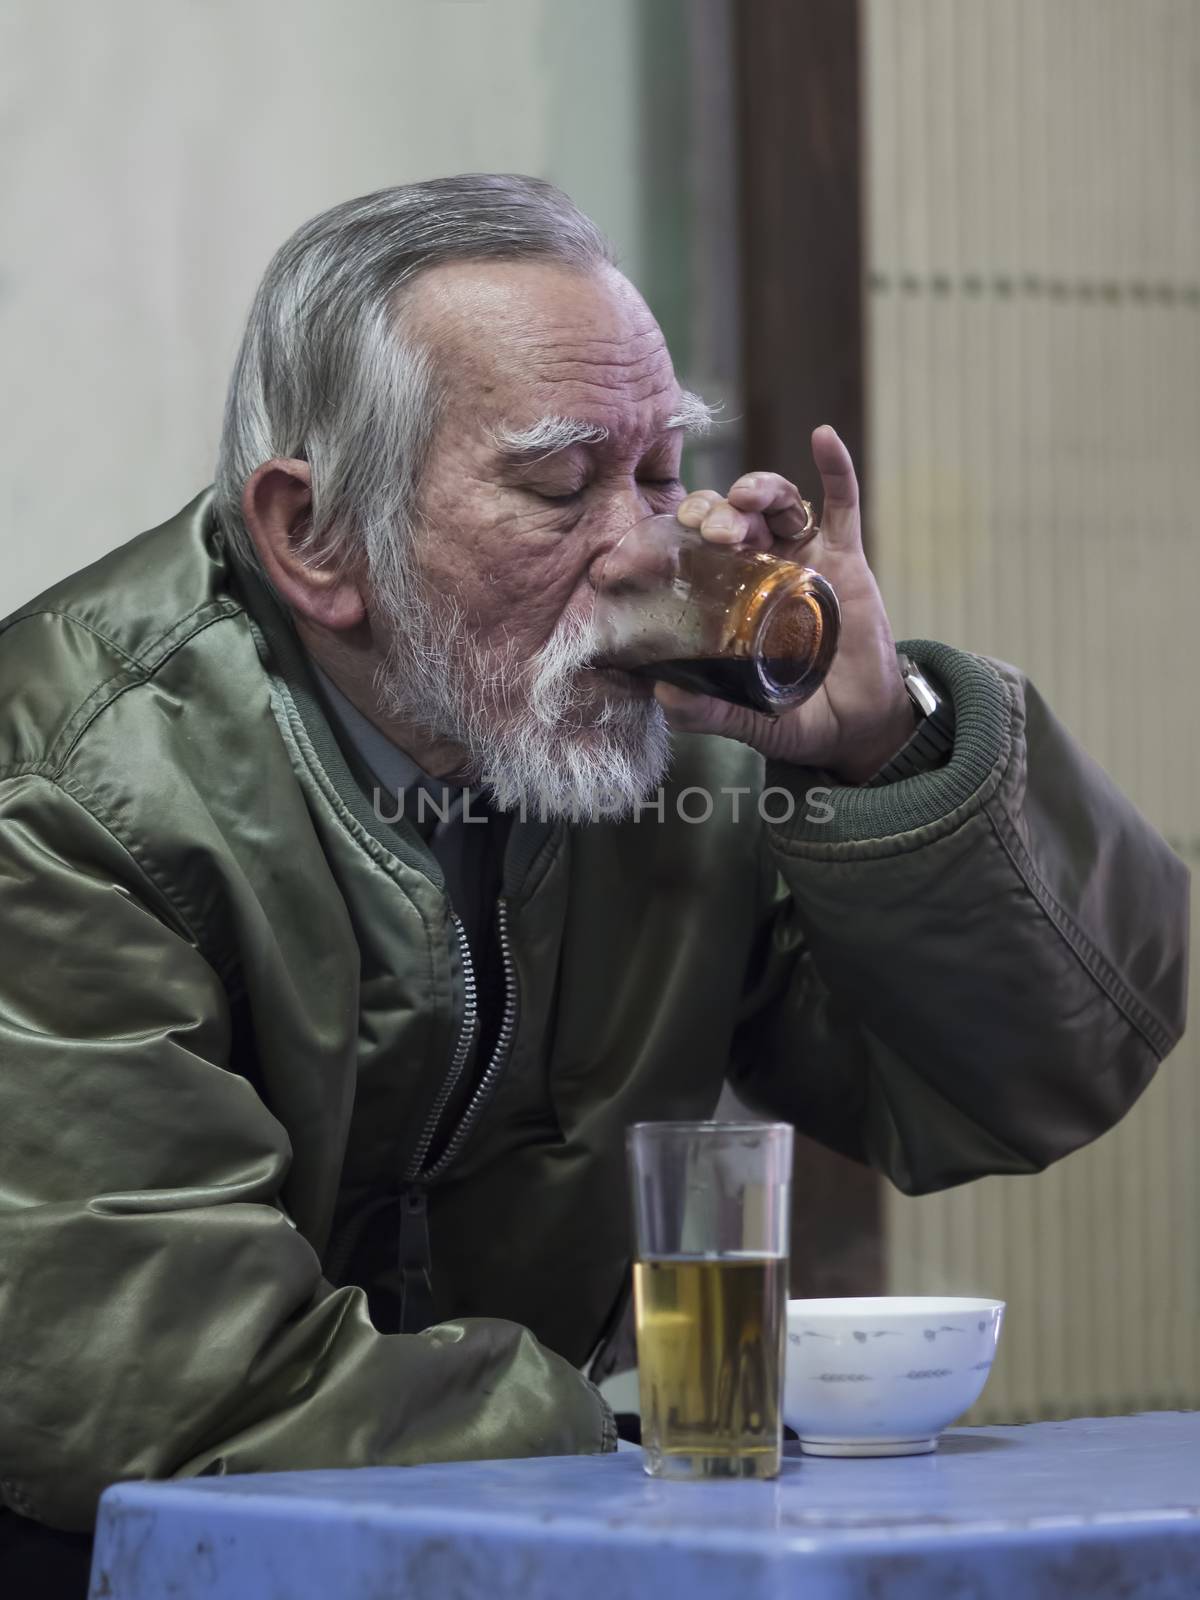 Hue, Vietnam - Dec 30, 2016: Old man savoring the intense pleasure of strong and dark vietnamese coffee at a cafe.